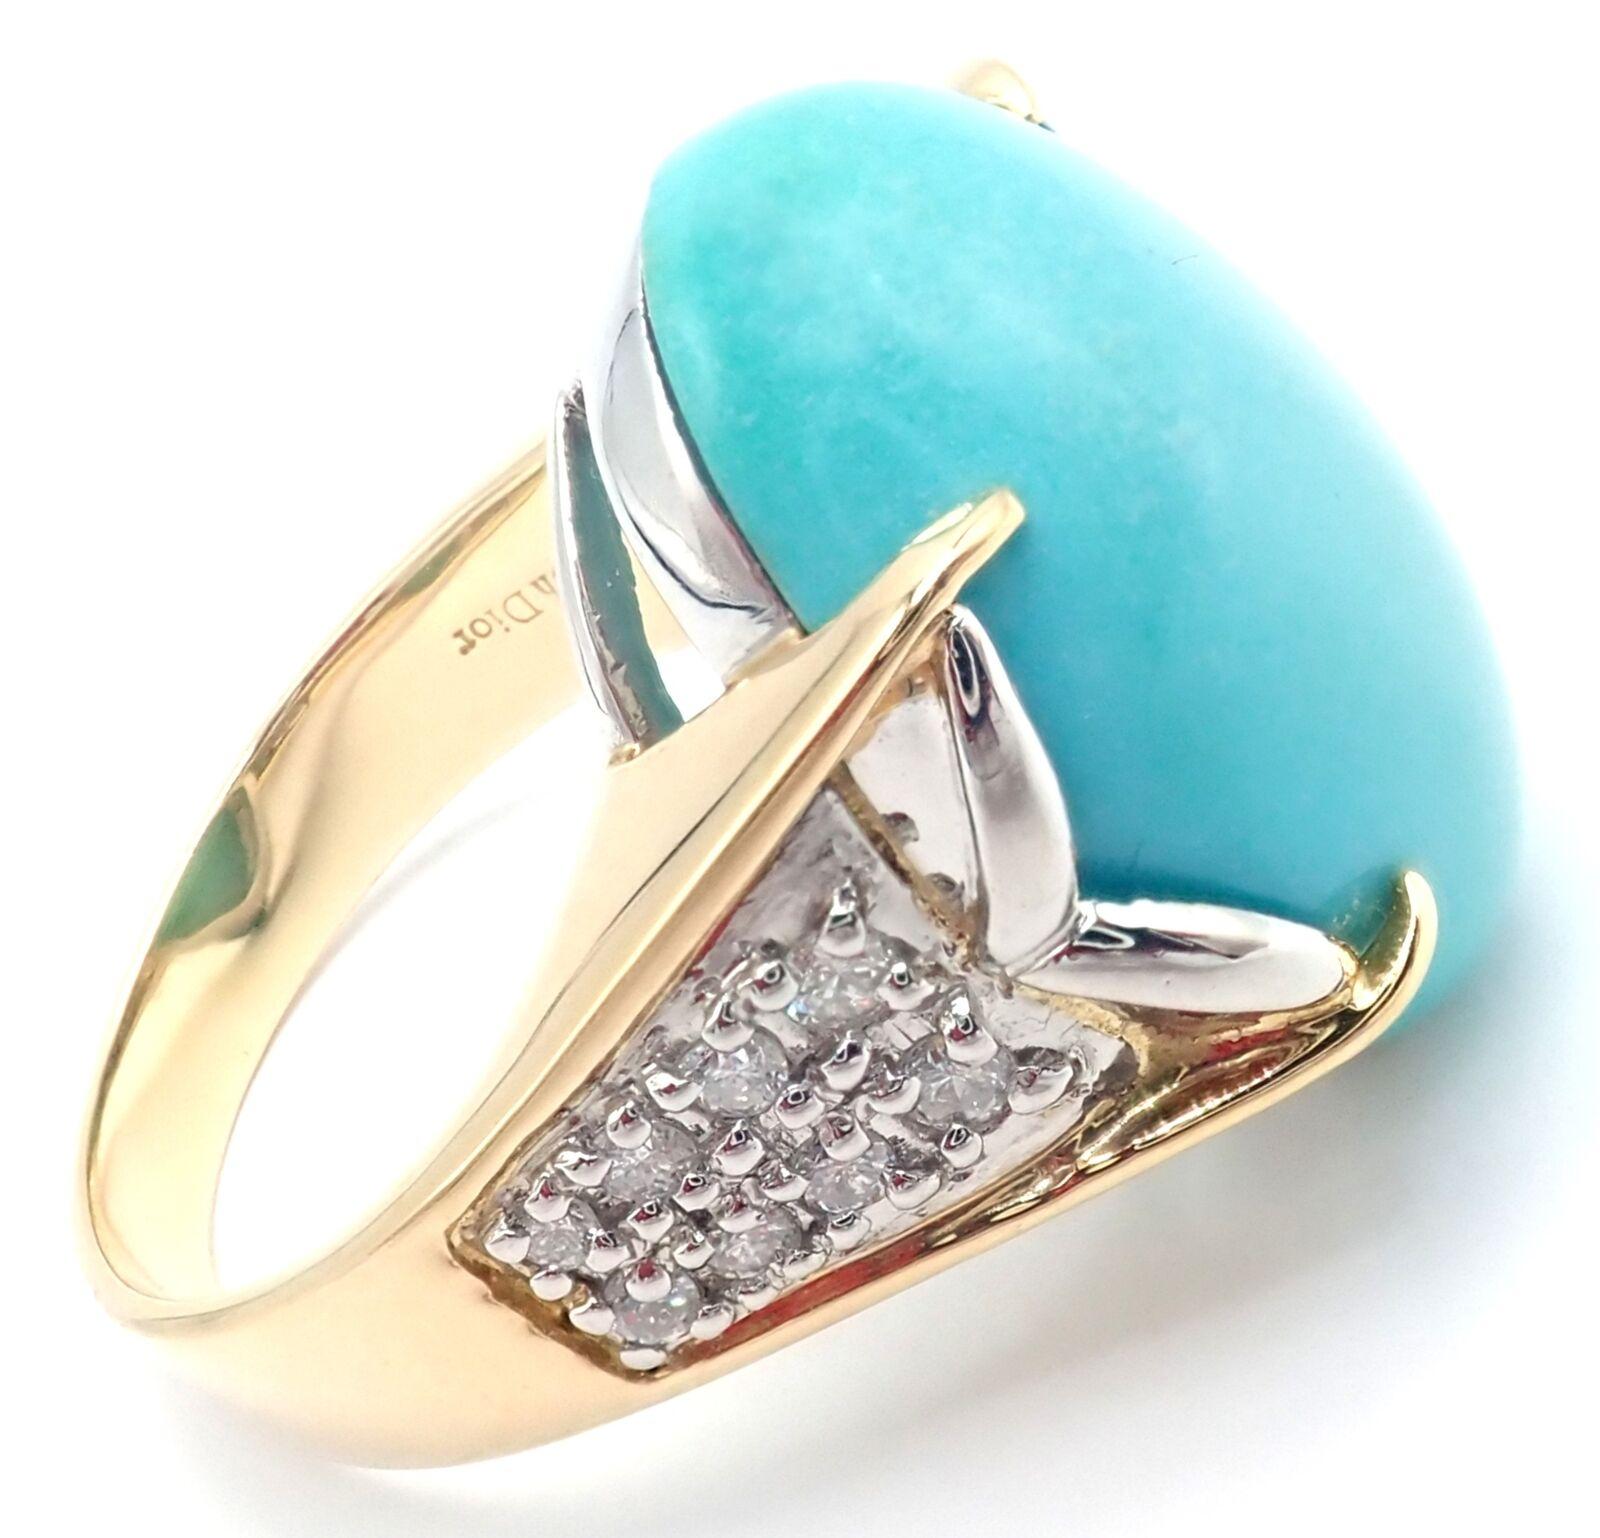 18k Yellow Gold and Platinum Diamond Large Turquoise Ring by Christian Dior. 
With 16 round brilliant cut diamonds VS1 clarity, E color total weight approx. .31ct
1 large oval turquoise stone 20mm x 15mm
Details: 
Size: 6 3/4
Width: 20mm
Weight: